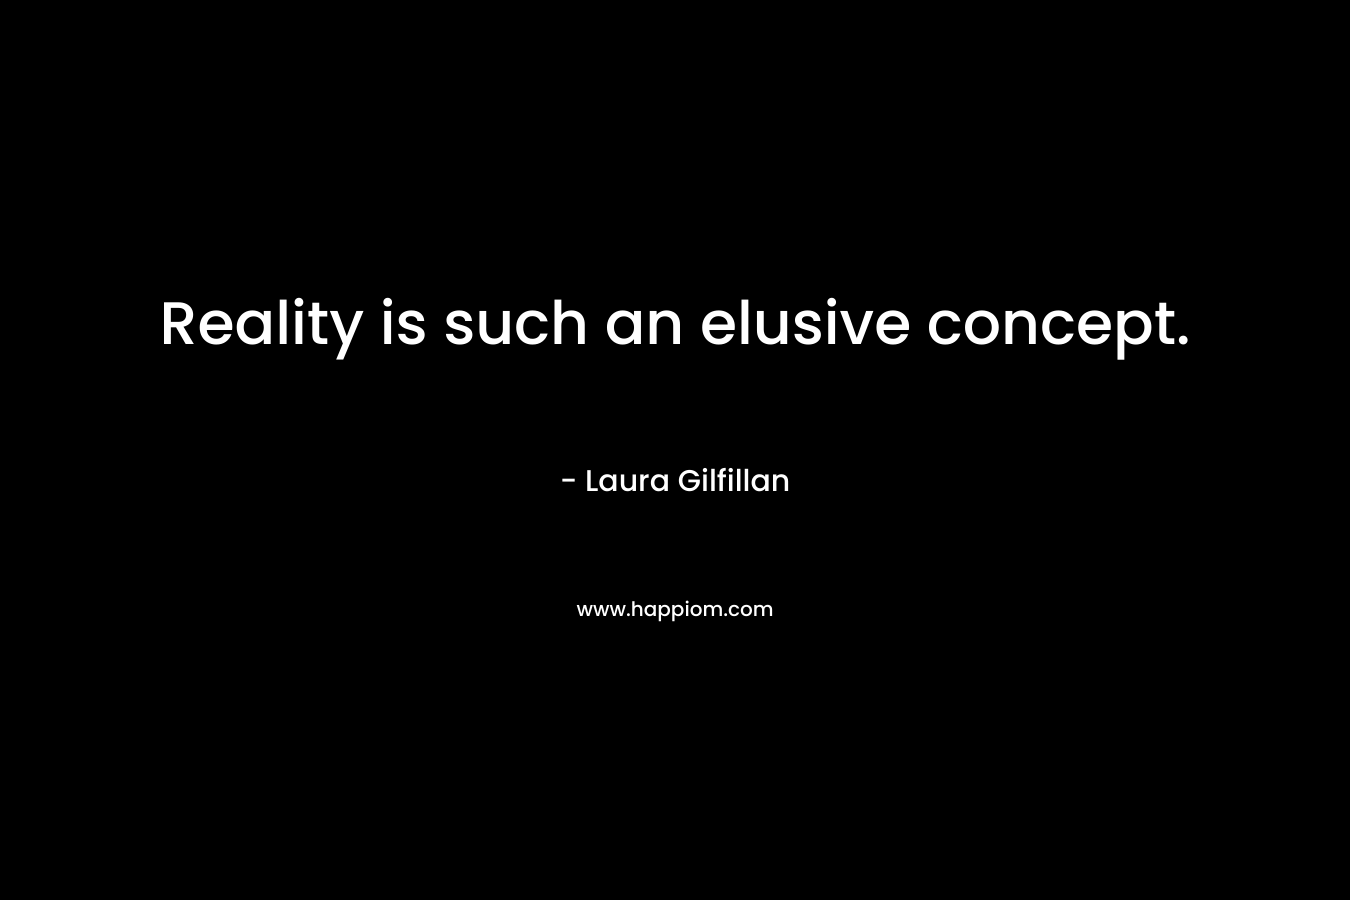 Reality is such an elusive concept. – Laura Gilfillan